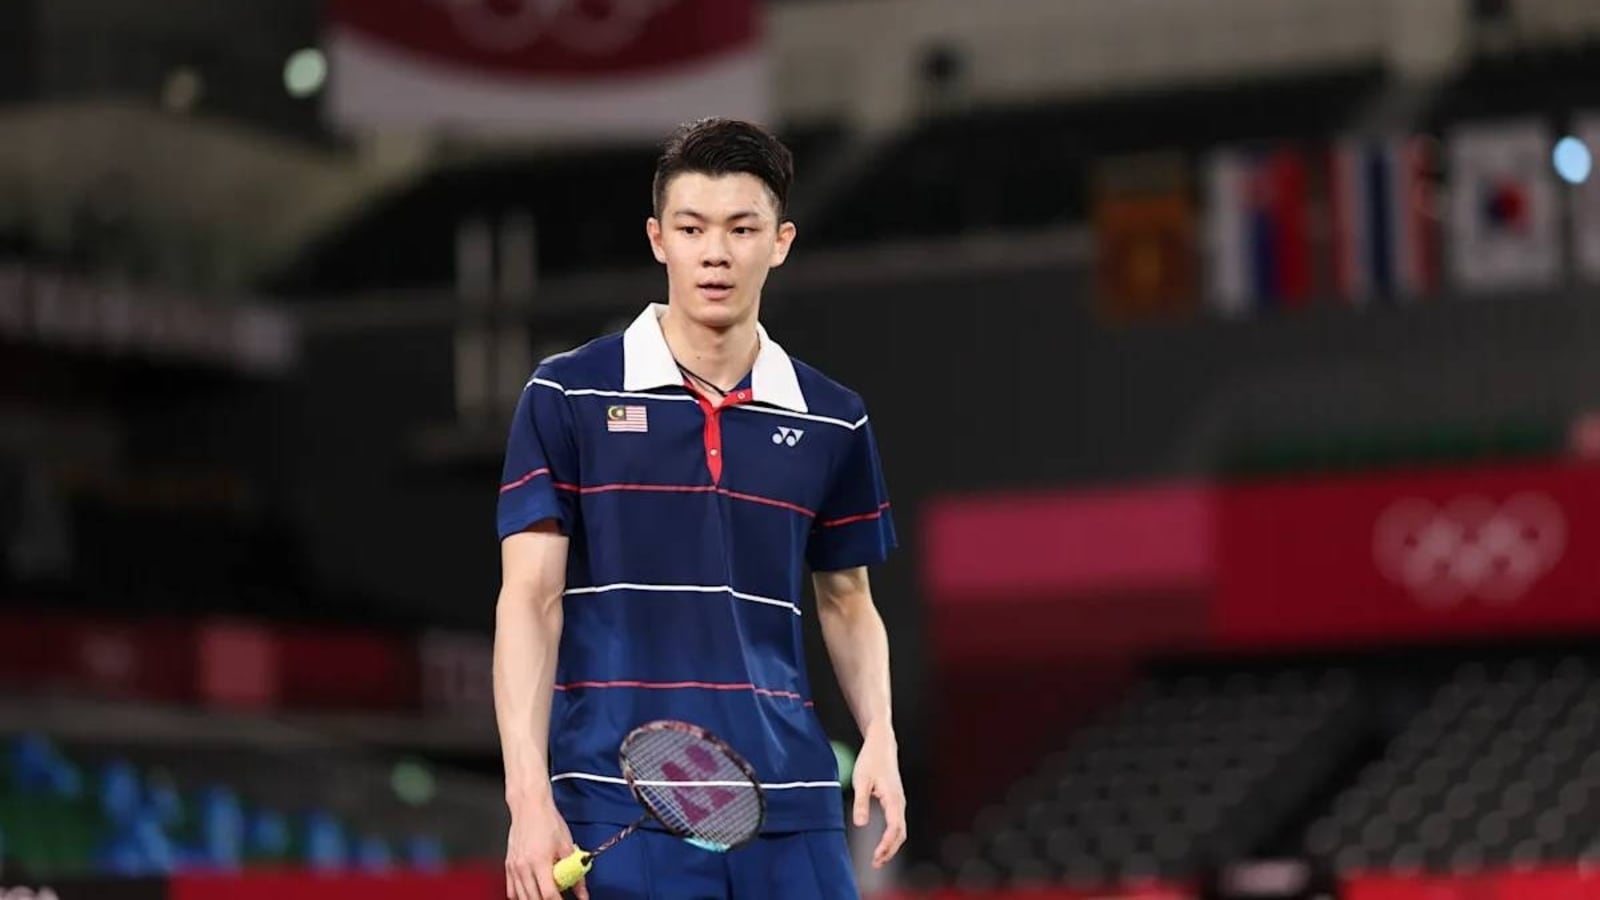 Lee Zii Jia incident revives call for changes in world badminton